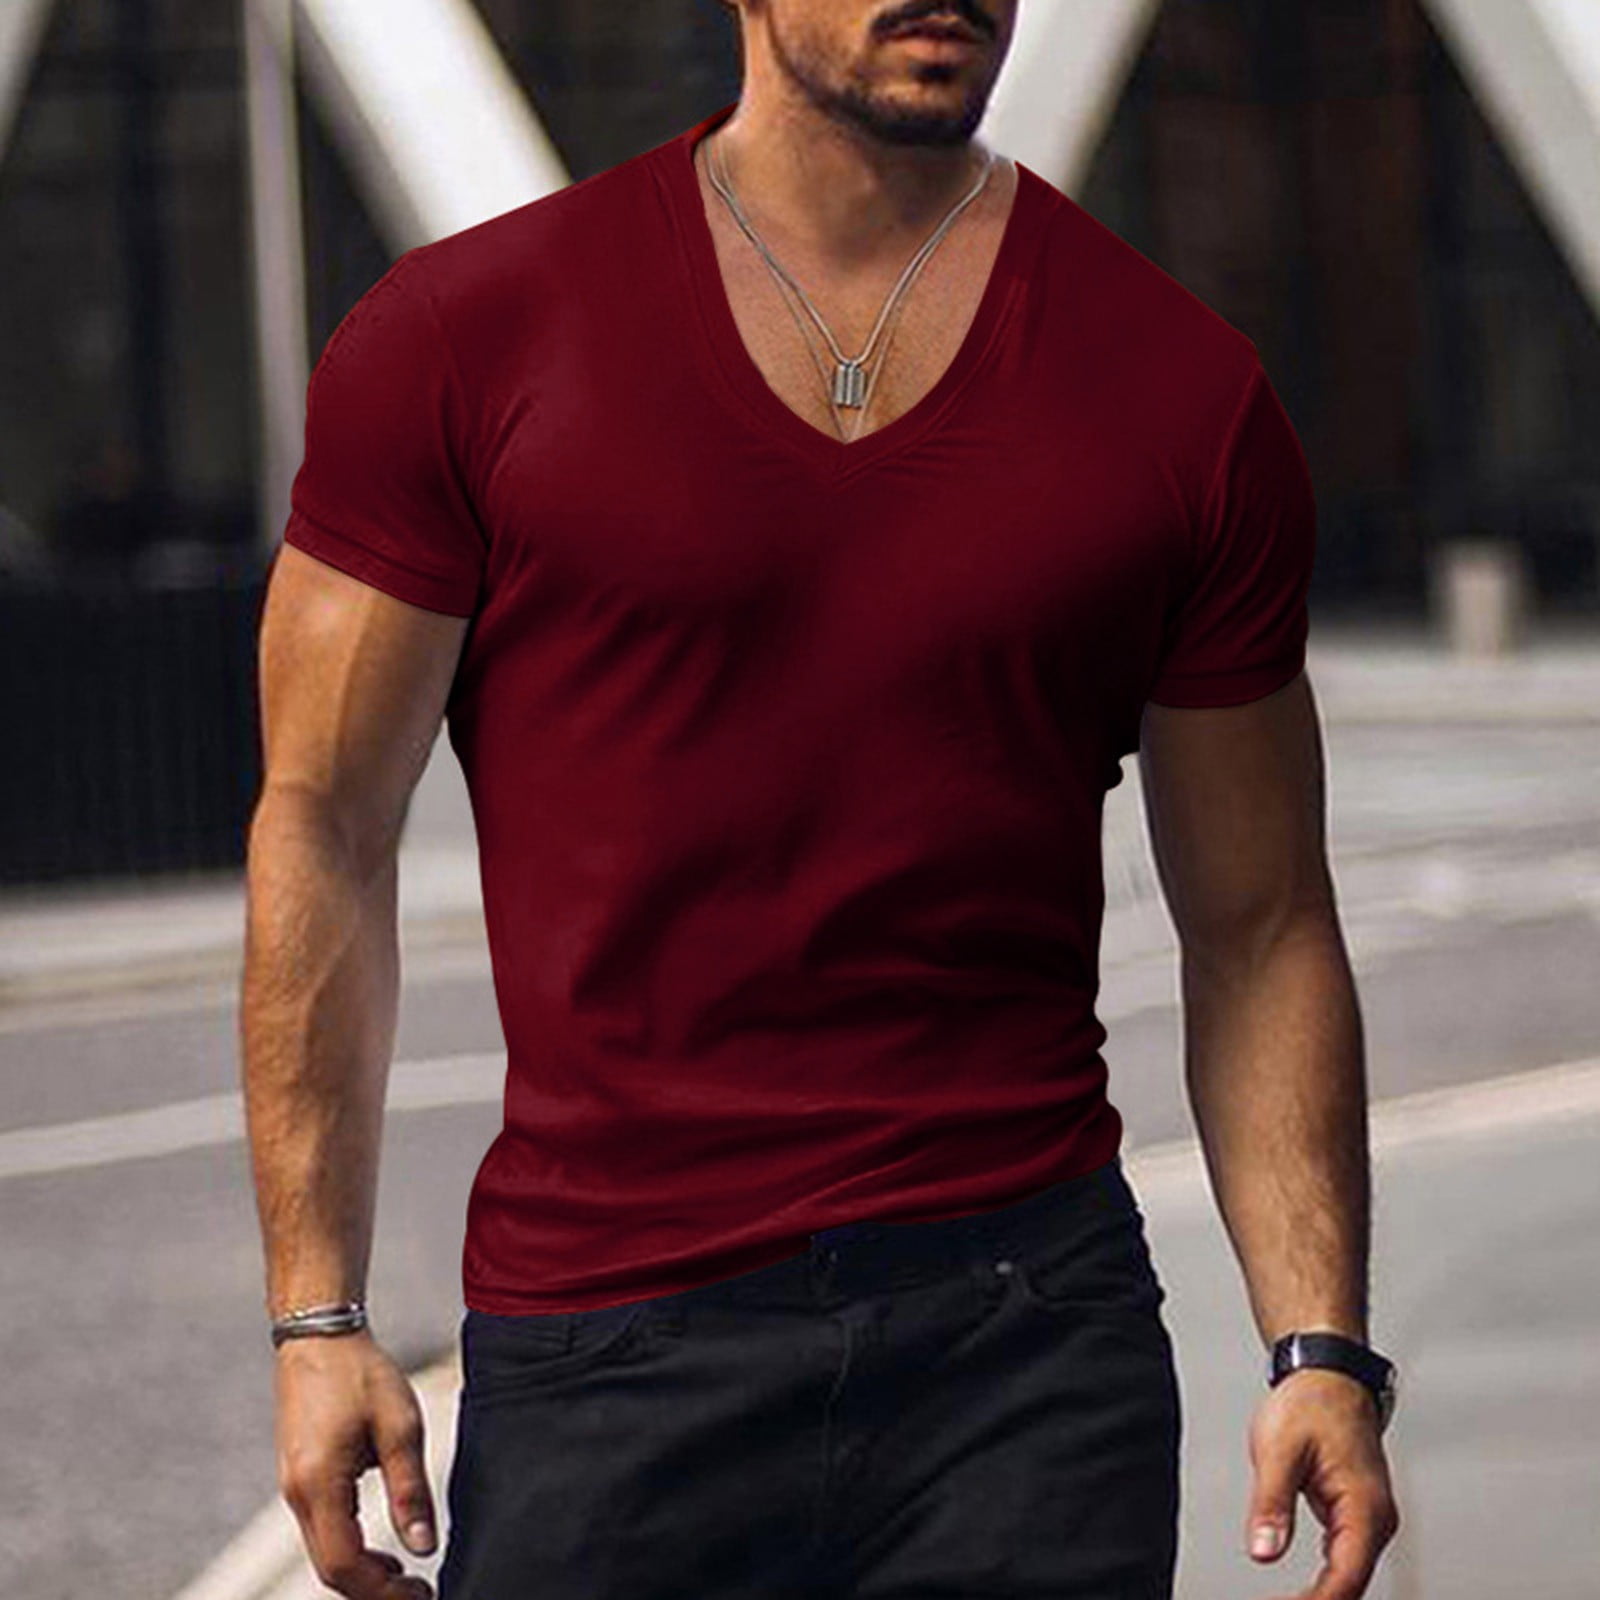 CAMERIARIO Men's Short Sleeve Solid Color Fashion T-Shirts, Sizes M-3XL ...